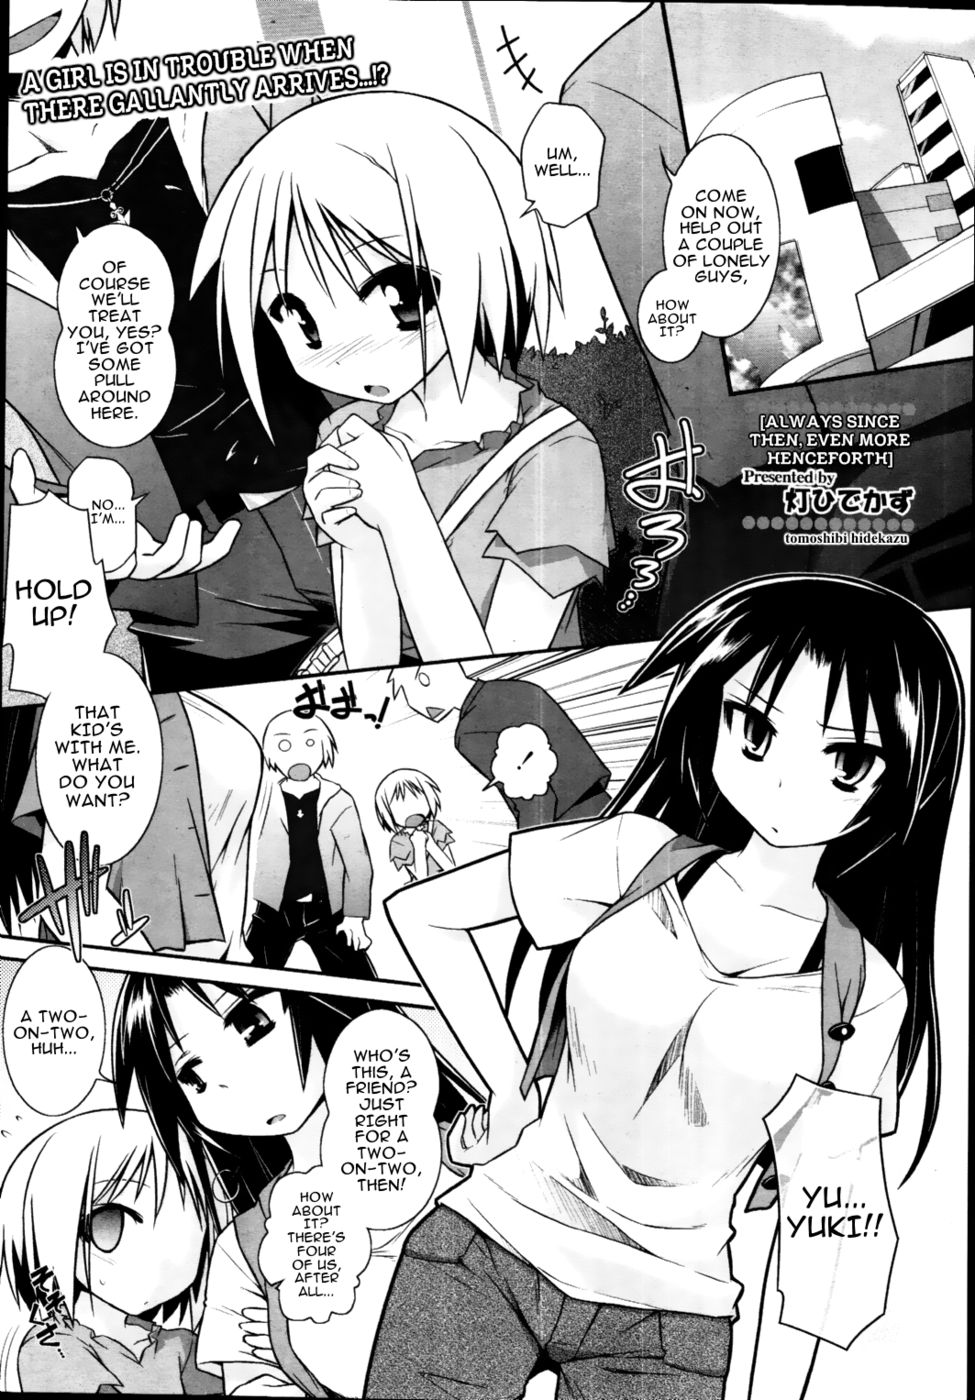 Hentai Manga Comic-Always Since Then, Even More Henceforth-Read-1